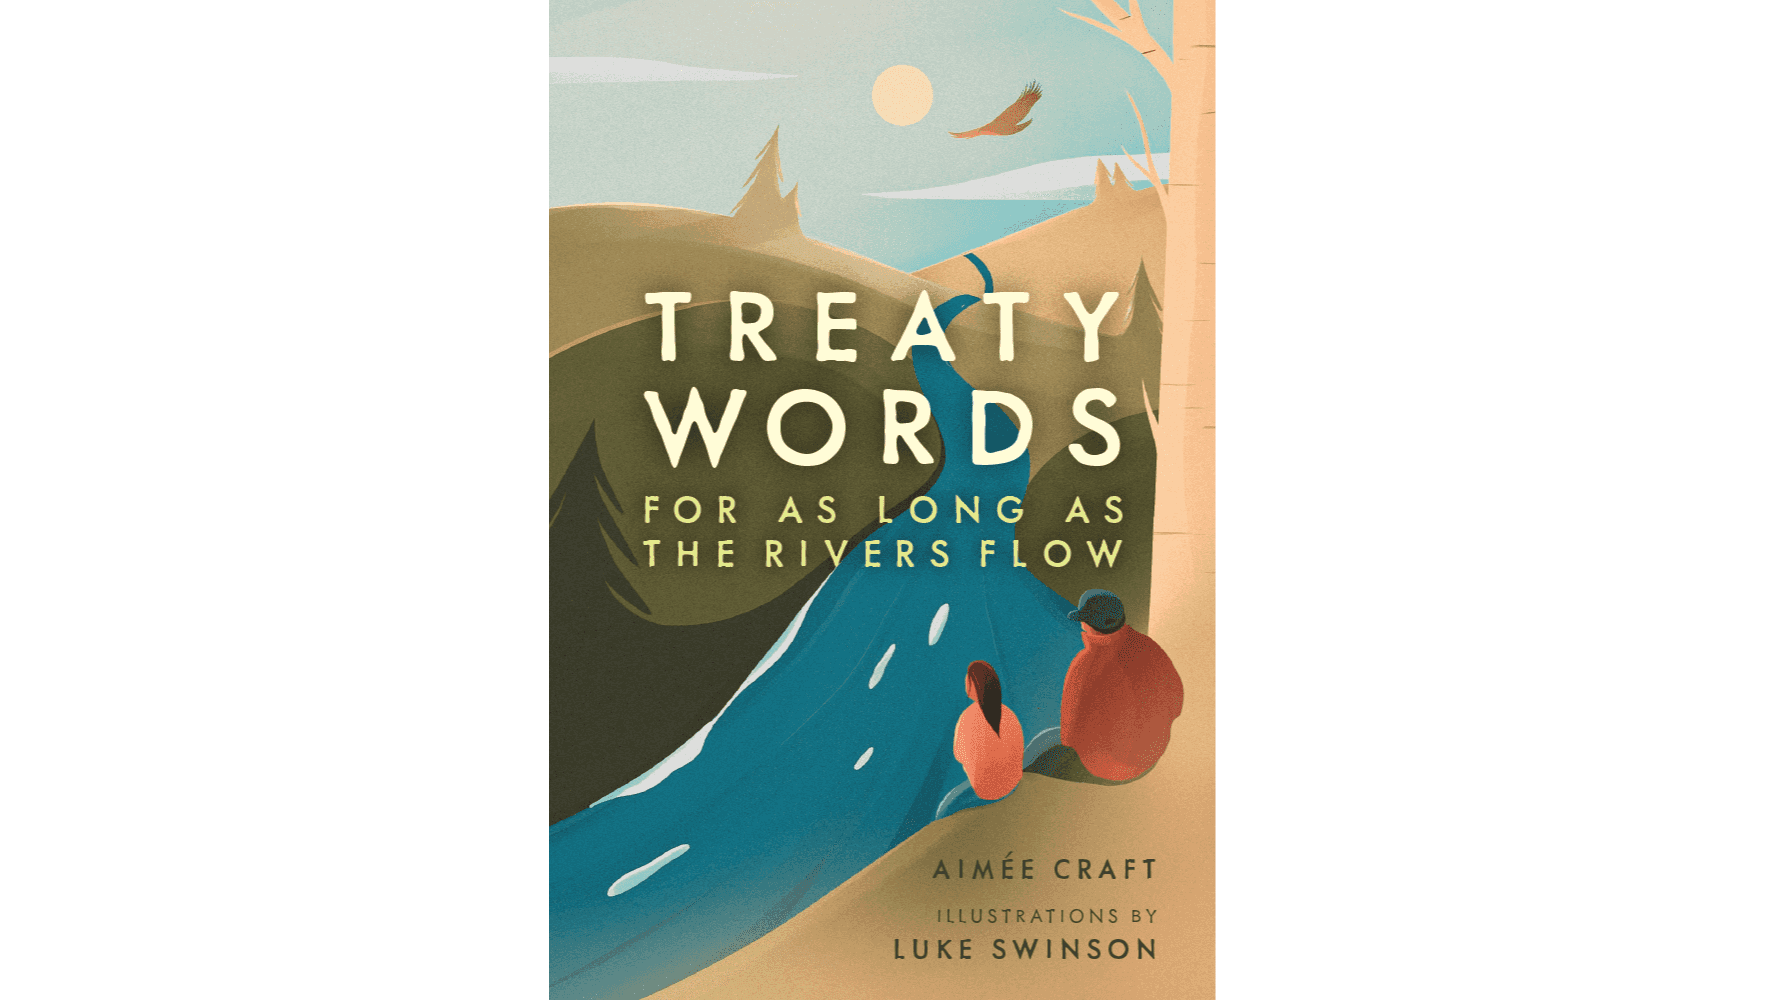 Treaty Words For As Long As the Rivers Flow